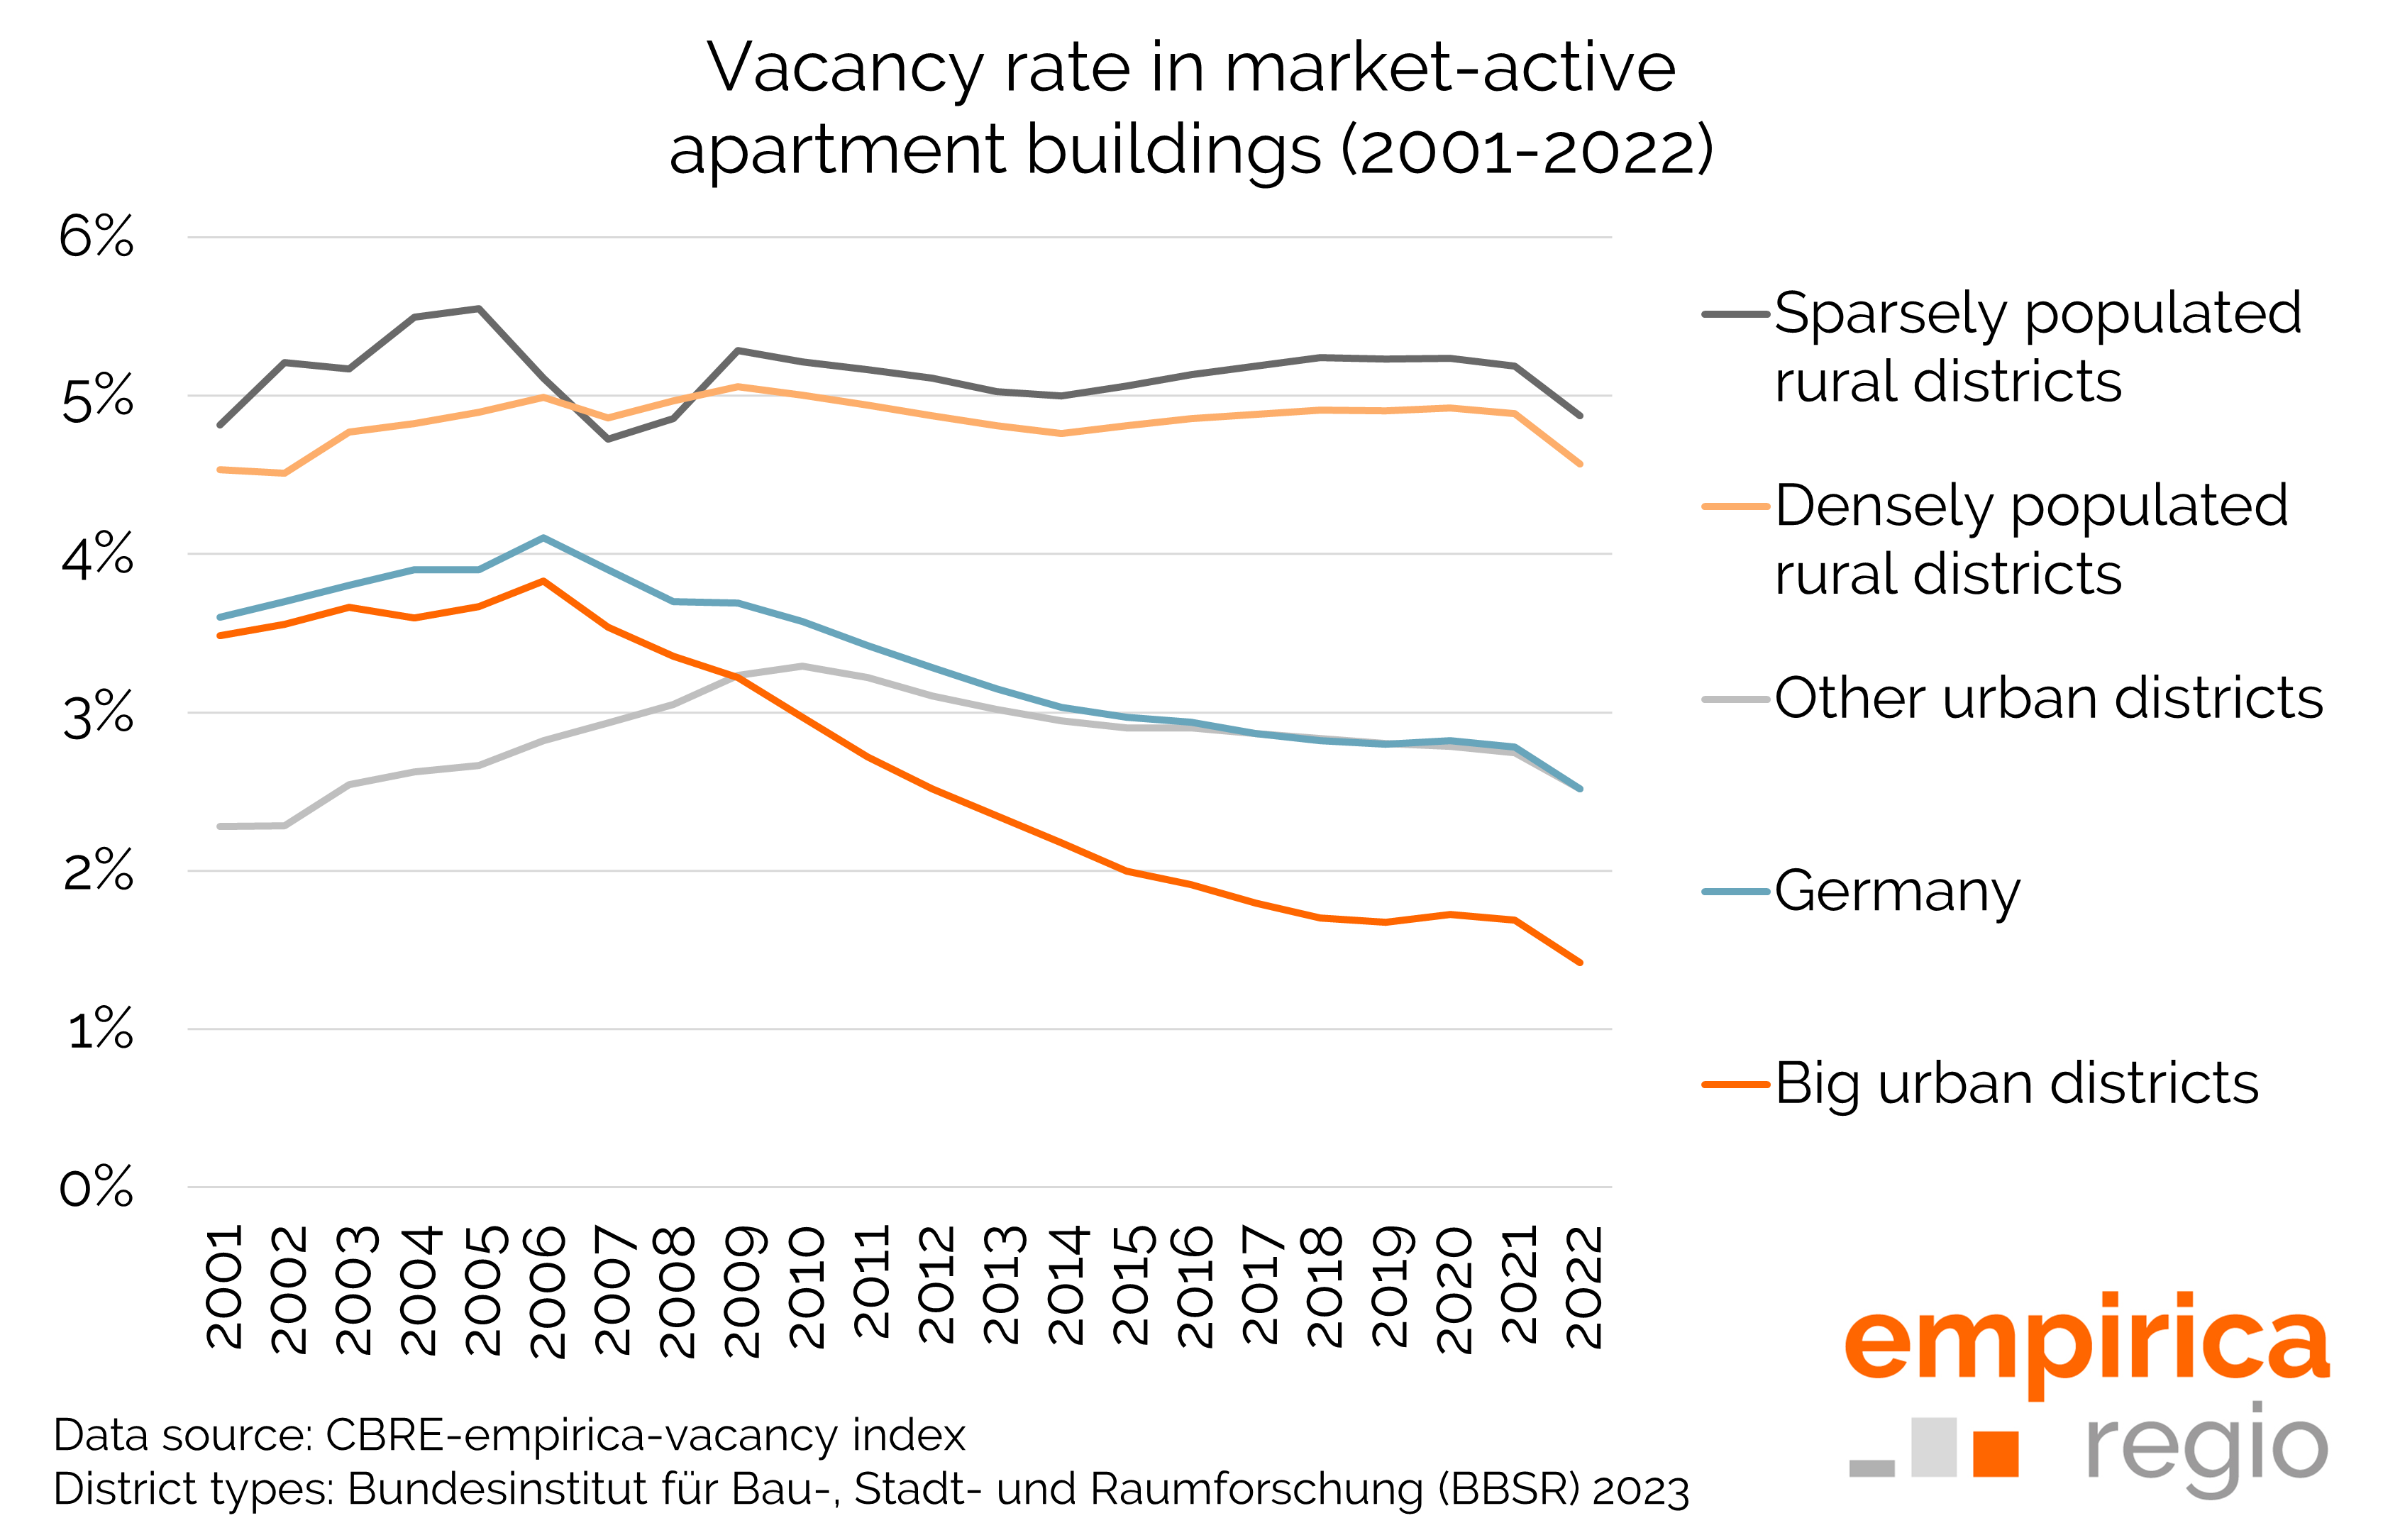 CBRE-empirica Vacancy Index for selected region types 2001 to 2023